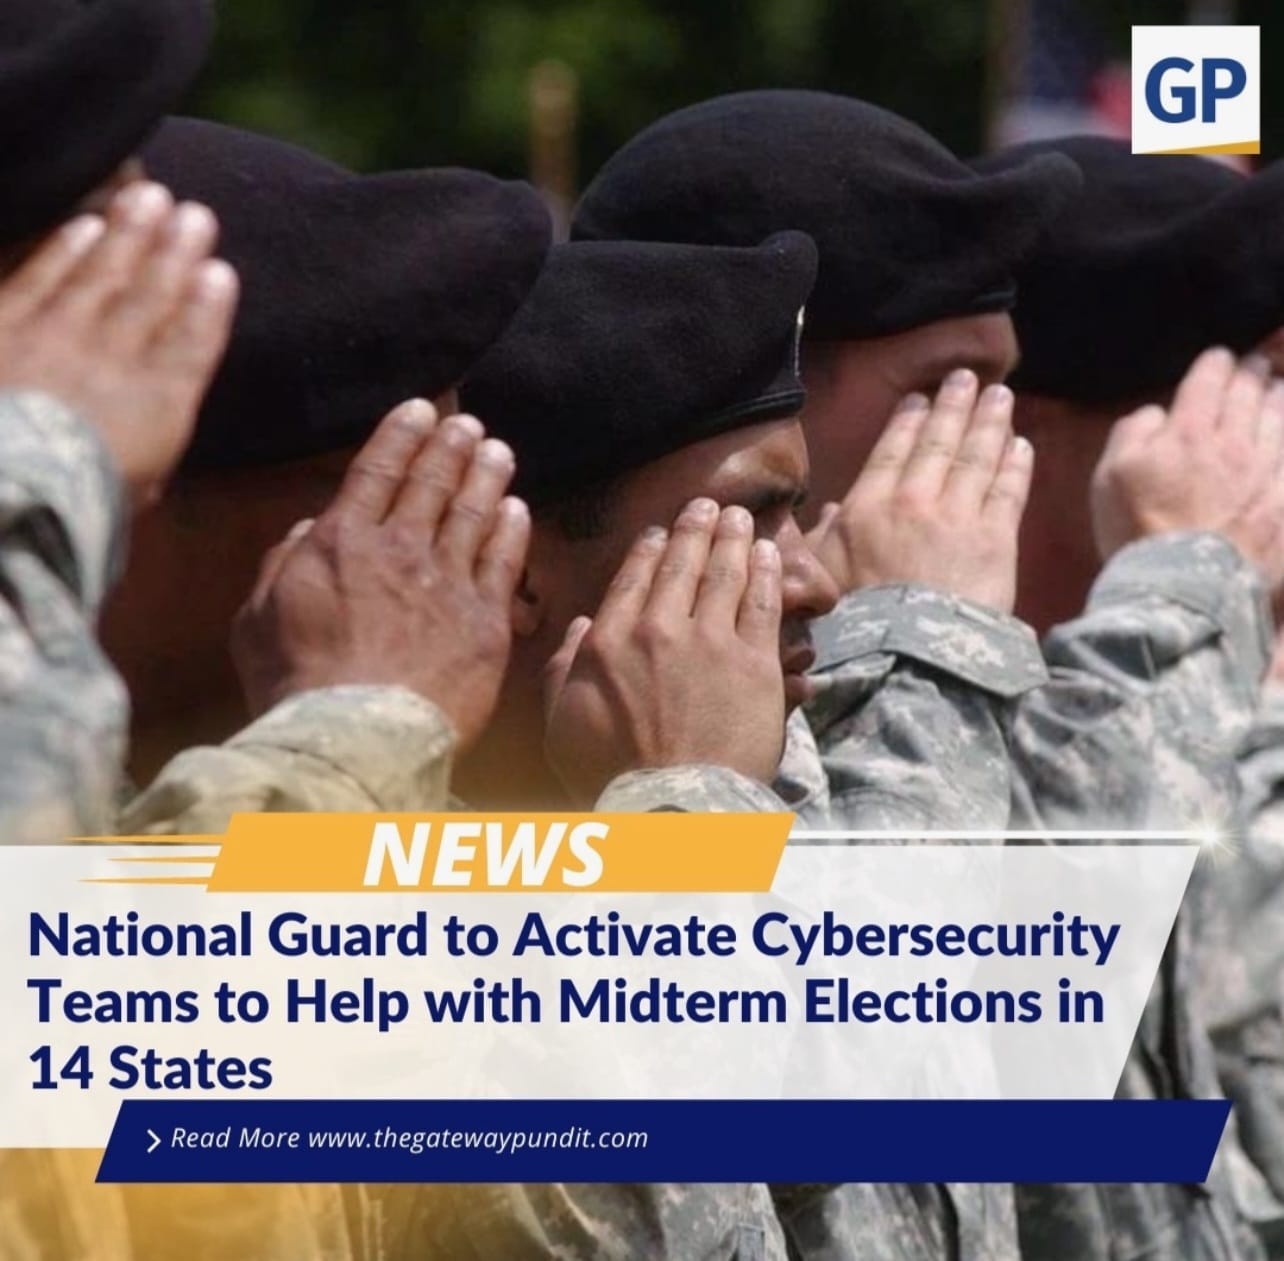 May be an image of one or more people and text that says 'GP NEWS National Guard to Activate Cybersecurity Teams to Help with Midterm Elections in 14 States Read Morewww.thegatewaypundit.com'